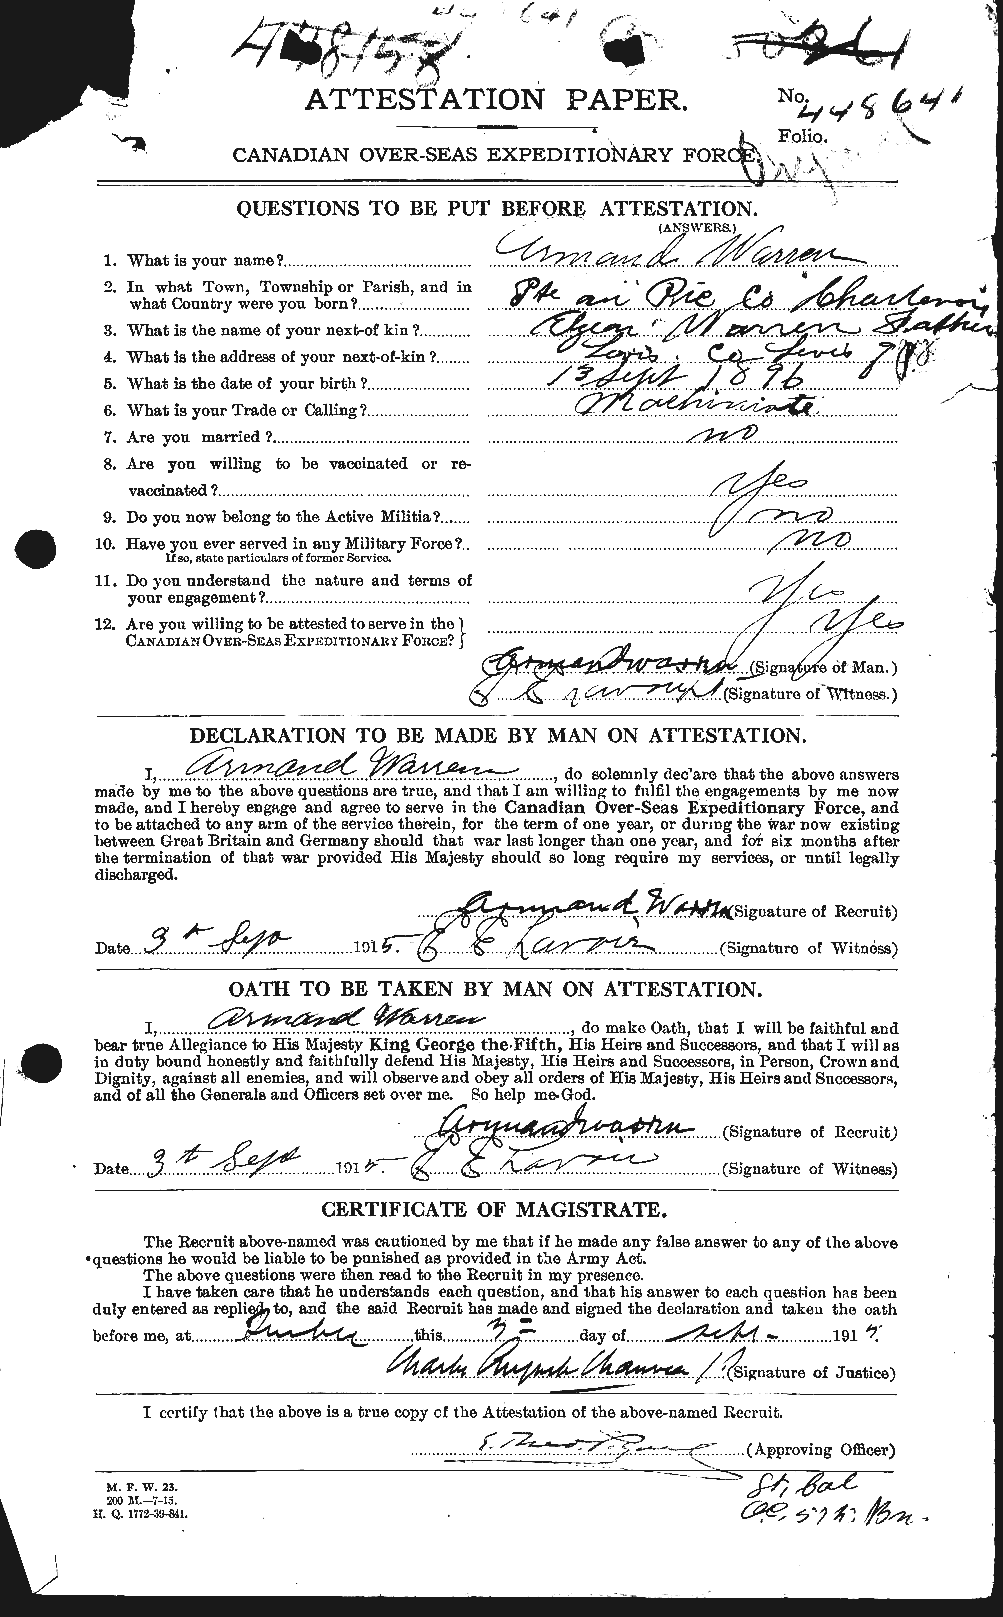 Personnel Records of the First World War - CEF 658354a